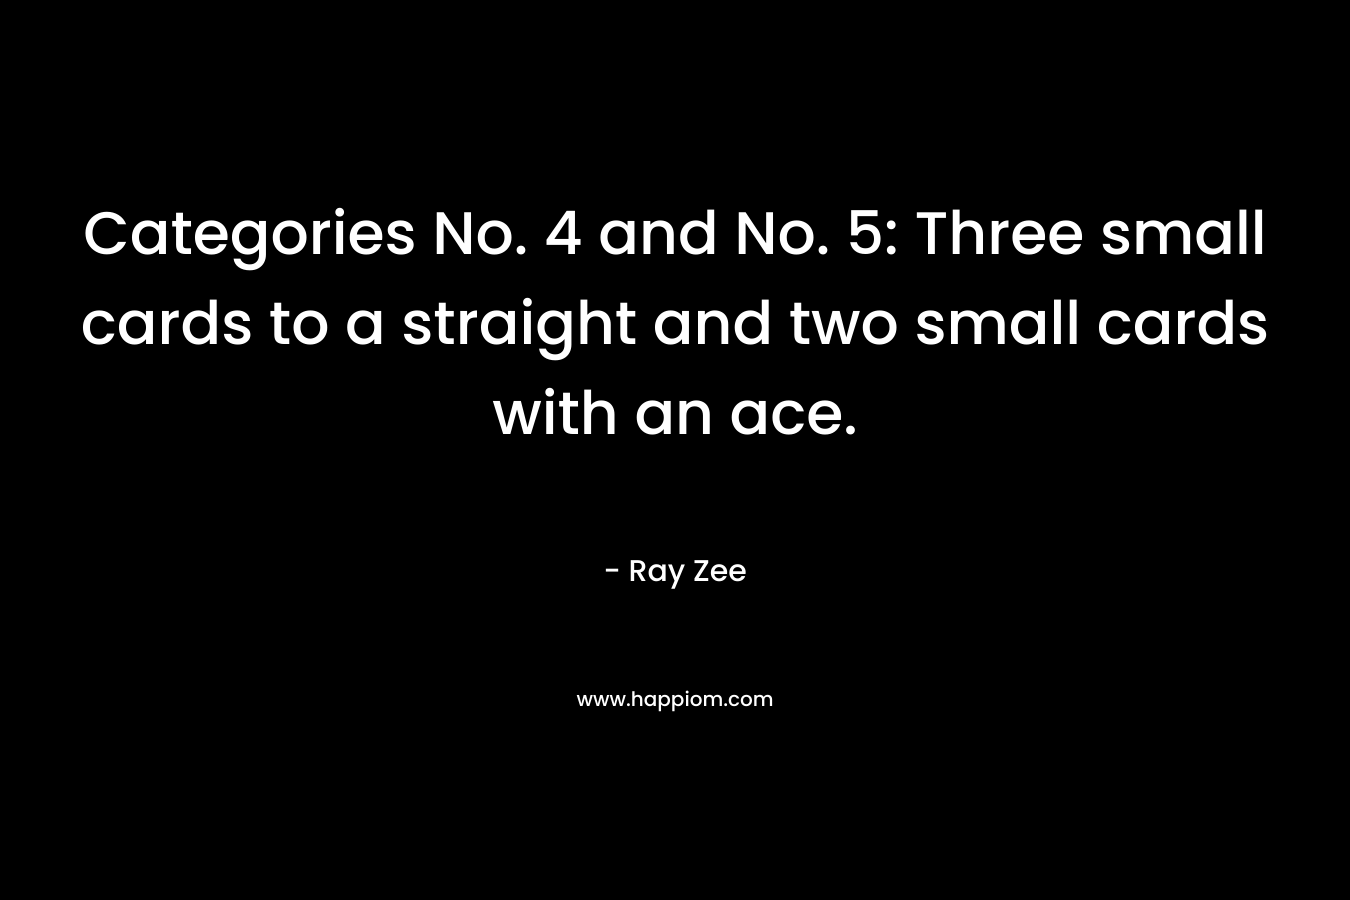 Categories No. 4 and No. 5: Three small cards to a straight and two small cards with an ace. – Ray Zee